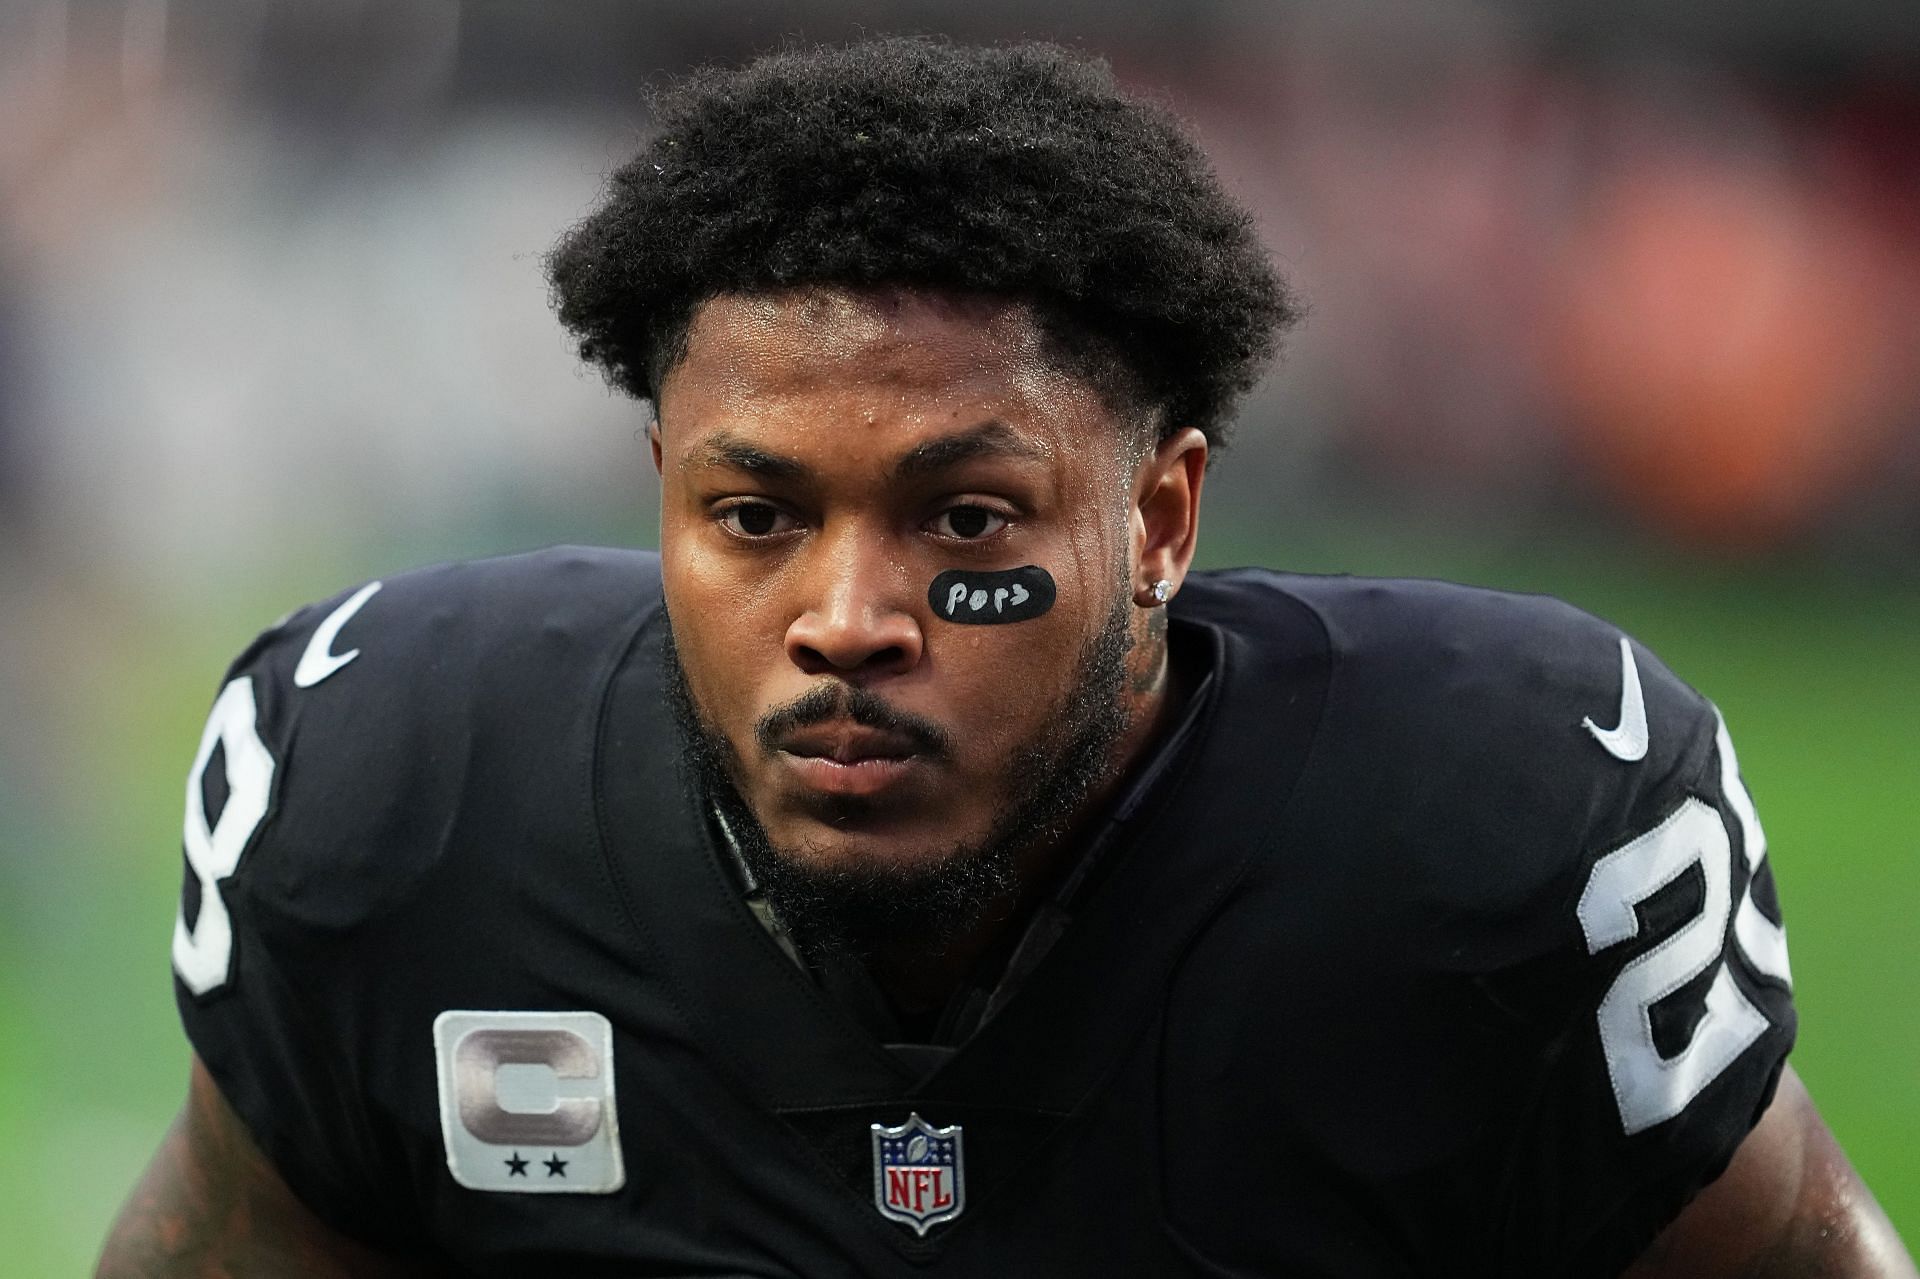 Josh Jacobs, #28 of the Las Vegas Raiders, warms up before a game against the Kansas City Chiefs at Allegiant Stadium on January 07, 2023, in Las Vegas, Nevada.